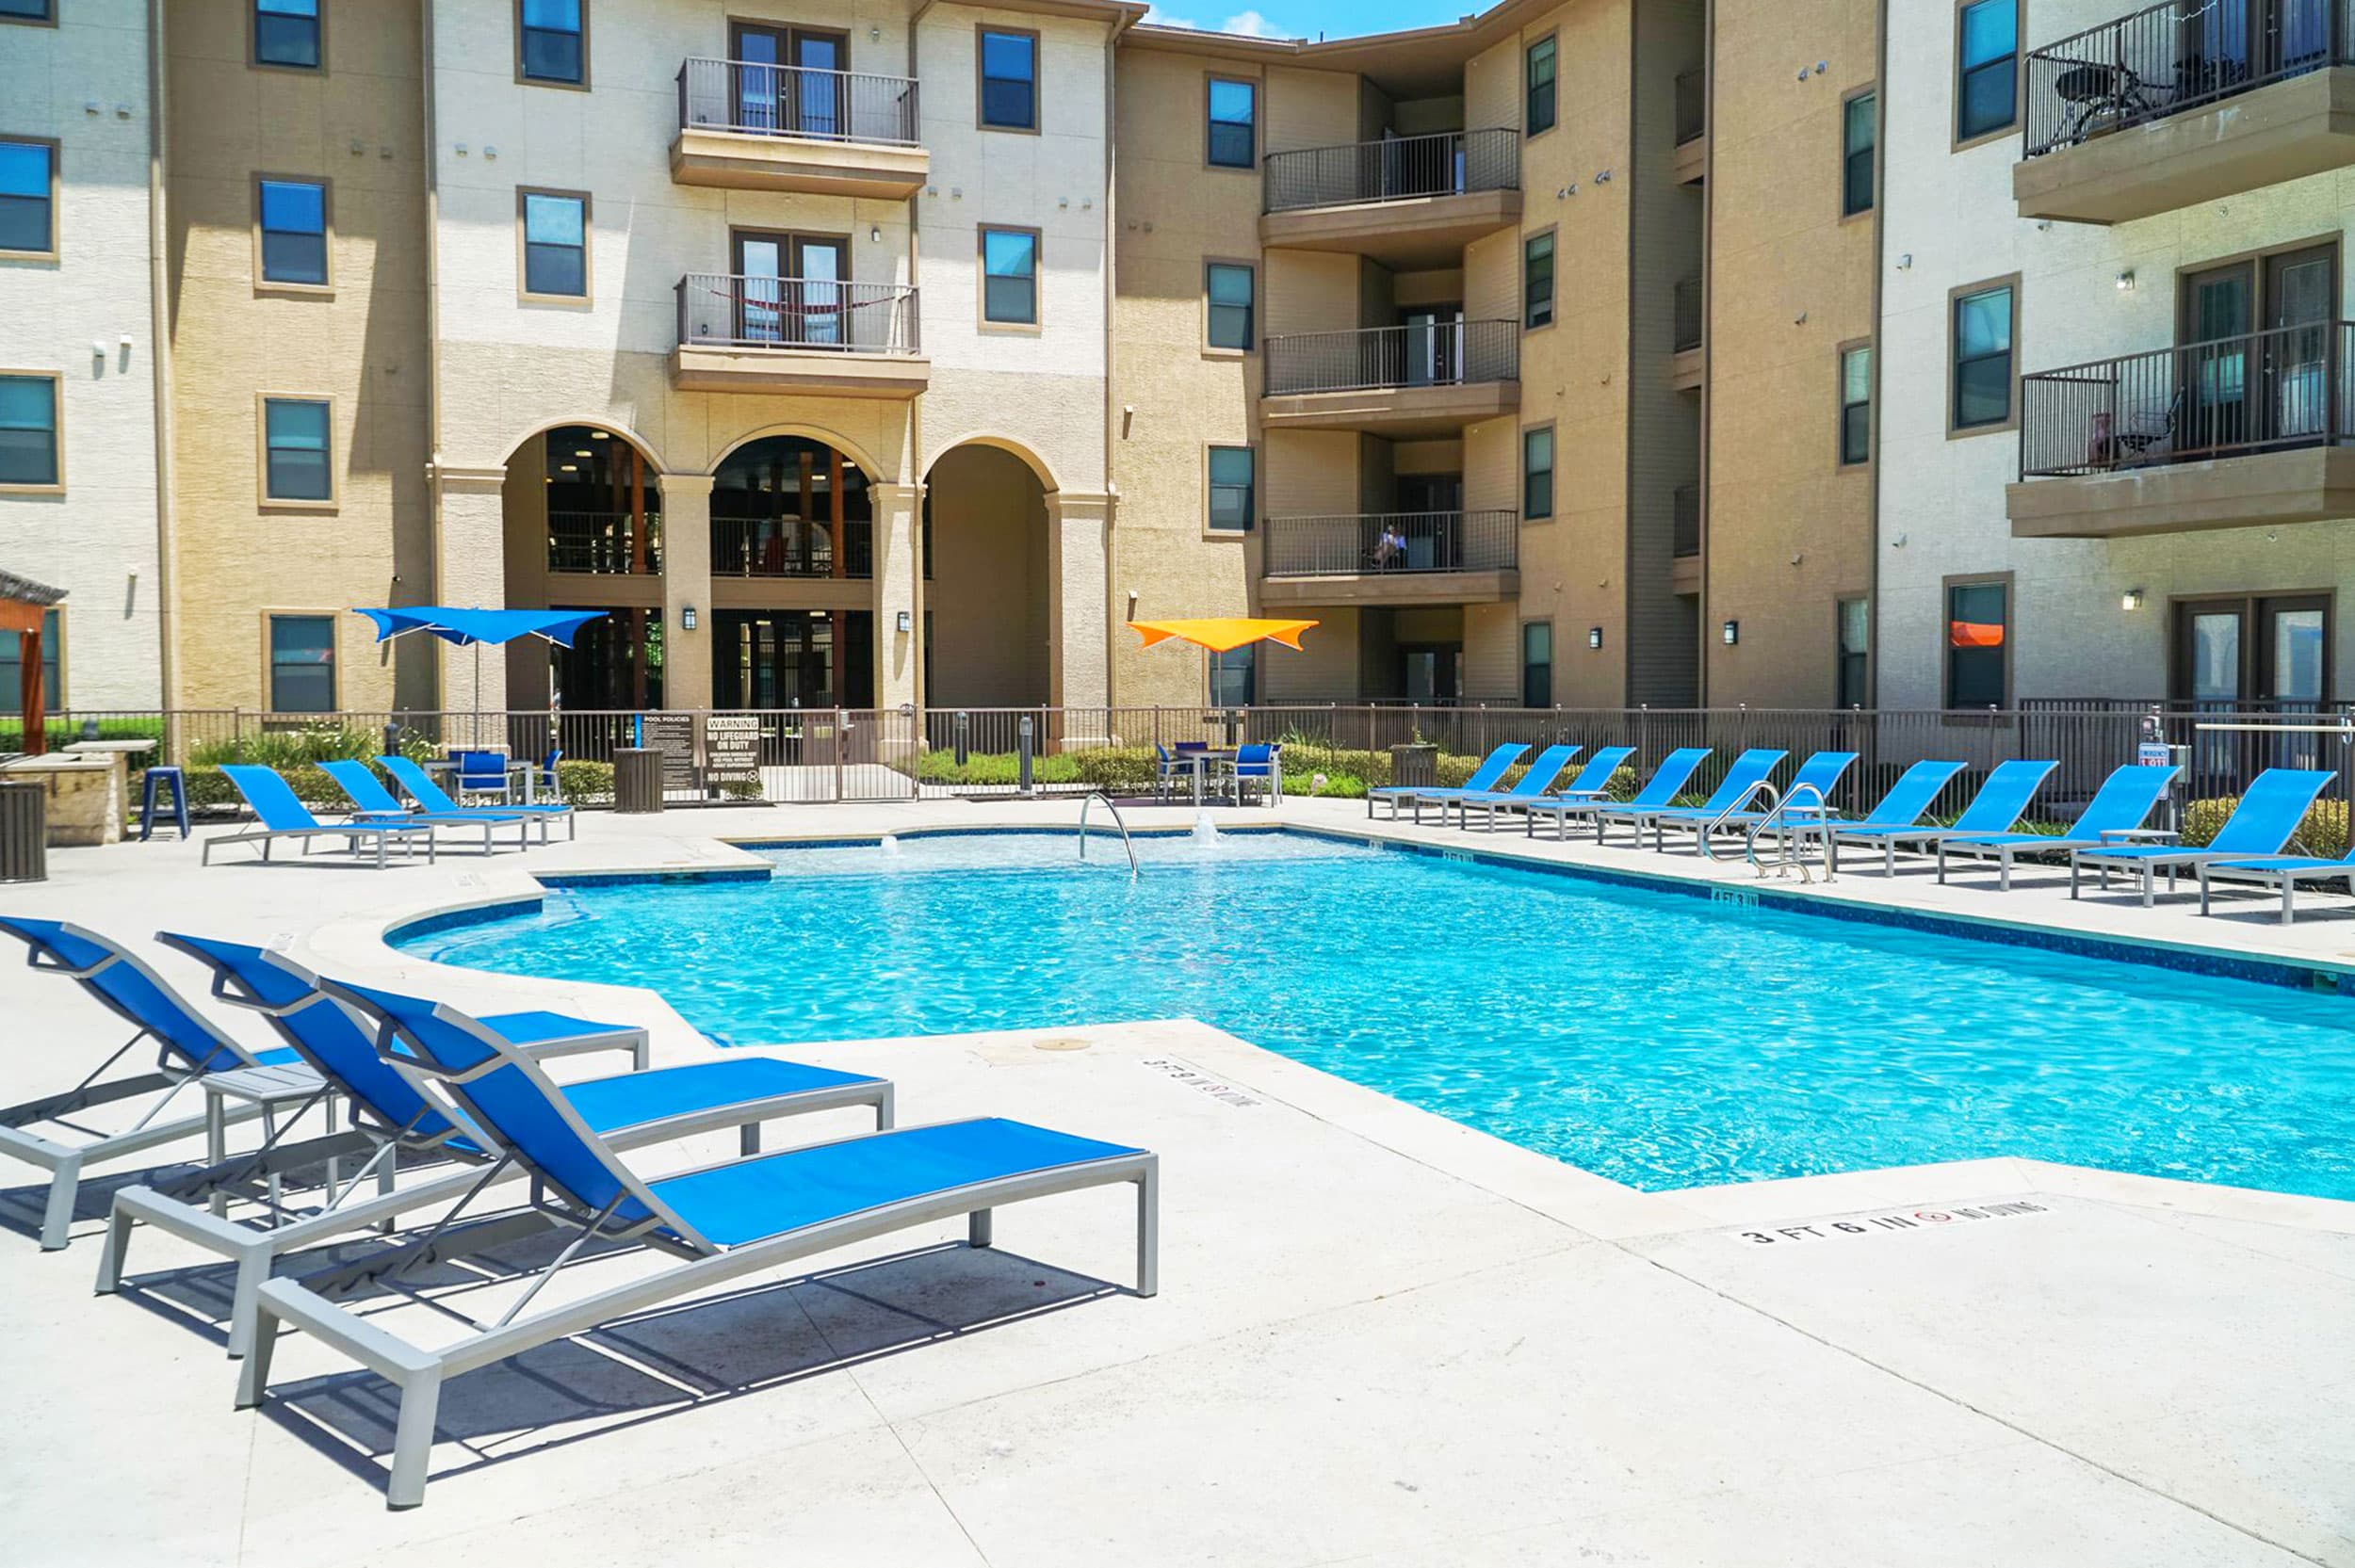 outdoor pool area with lounge chairs at prado student living apartments